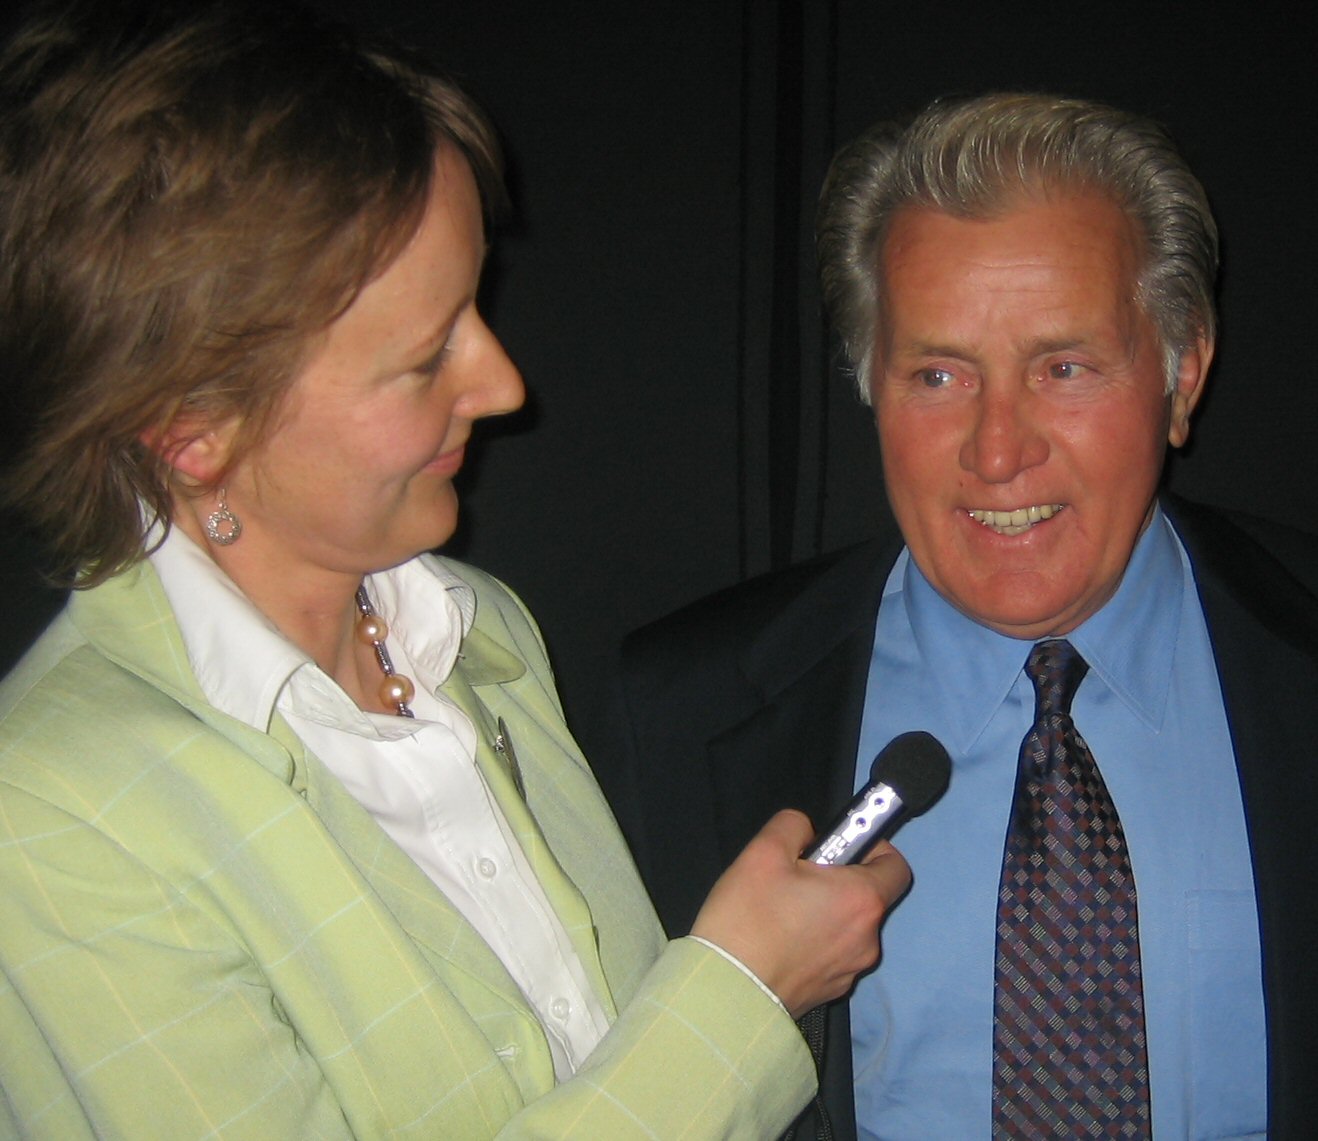 Martin Sheen, the activist and actor